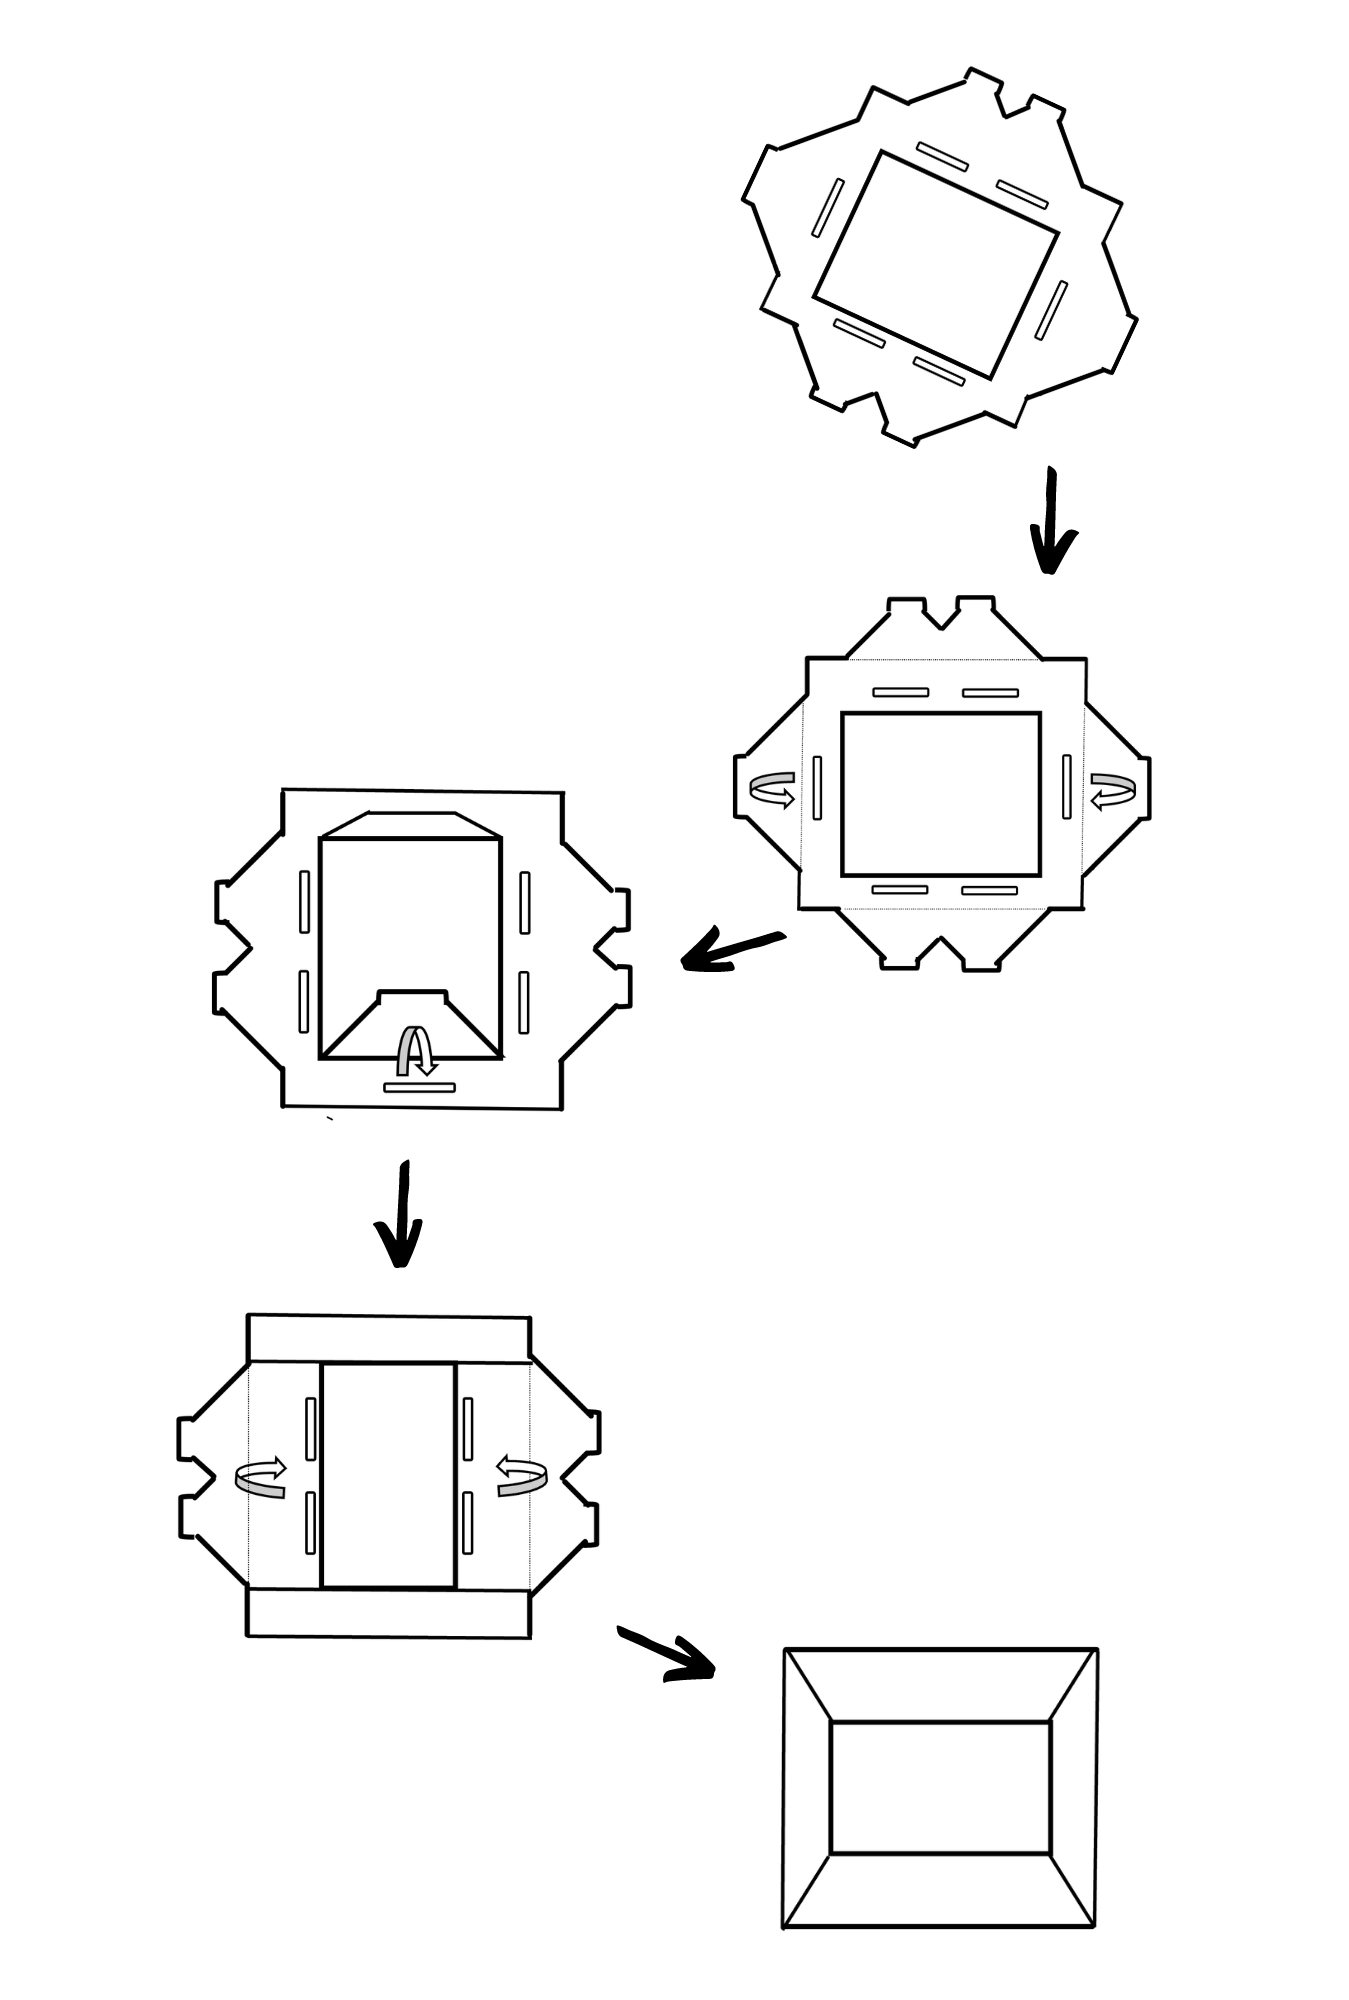 Illustrated guide to folding the frames.